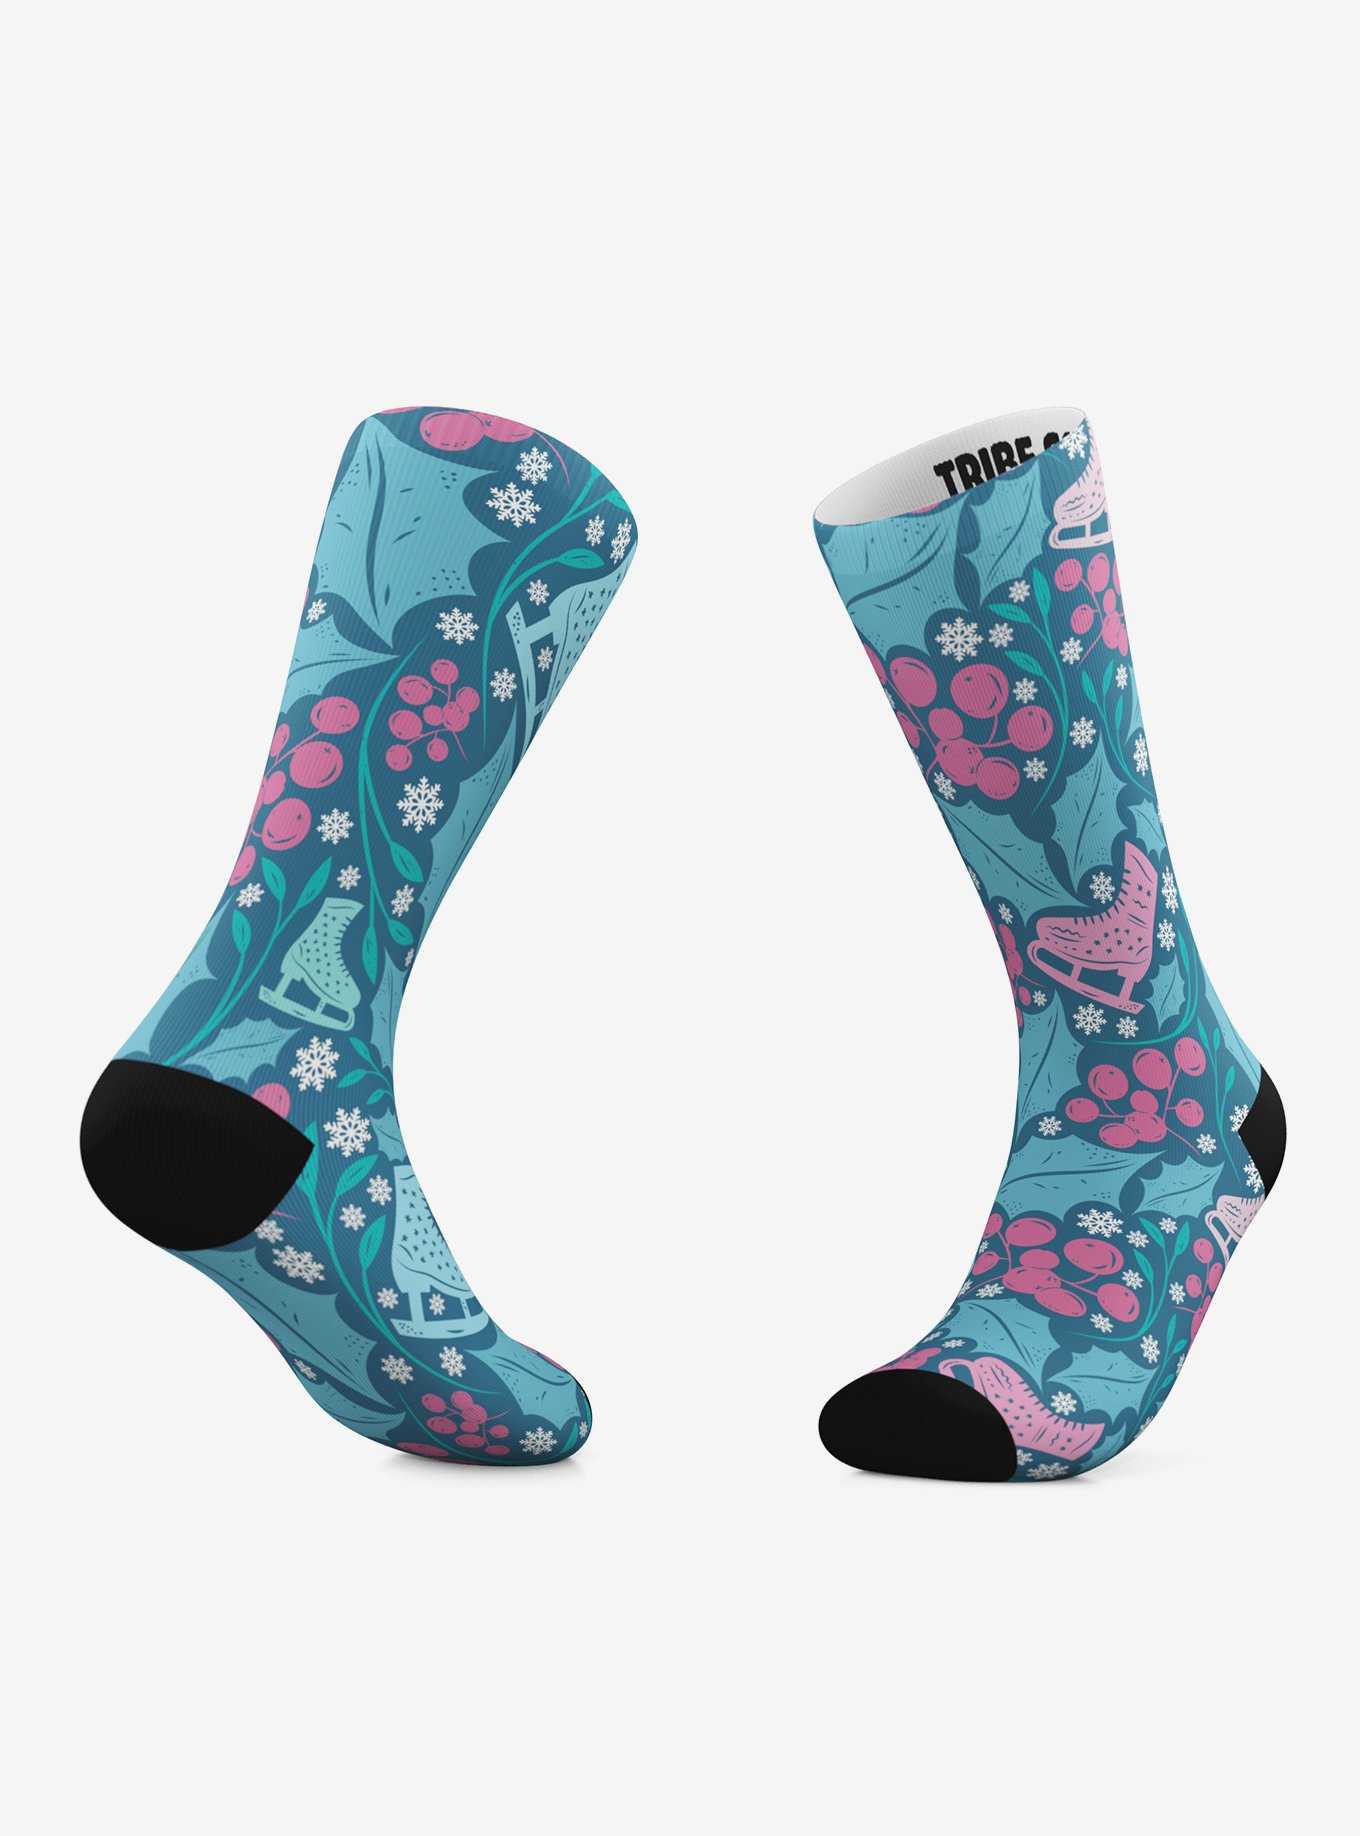 Winter Skater And Wintery Awesomeness Crew Socks 2 Pair, , hi-res